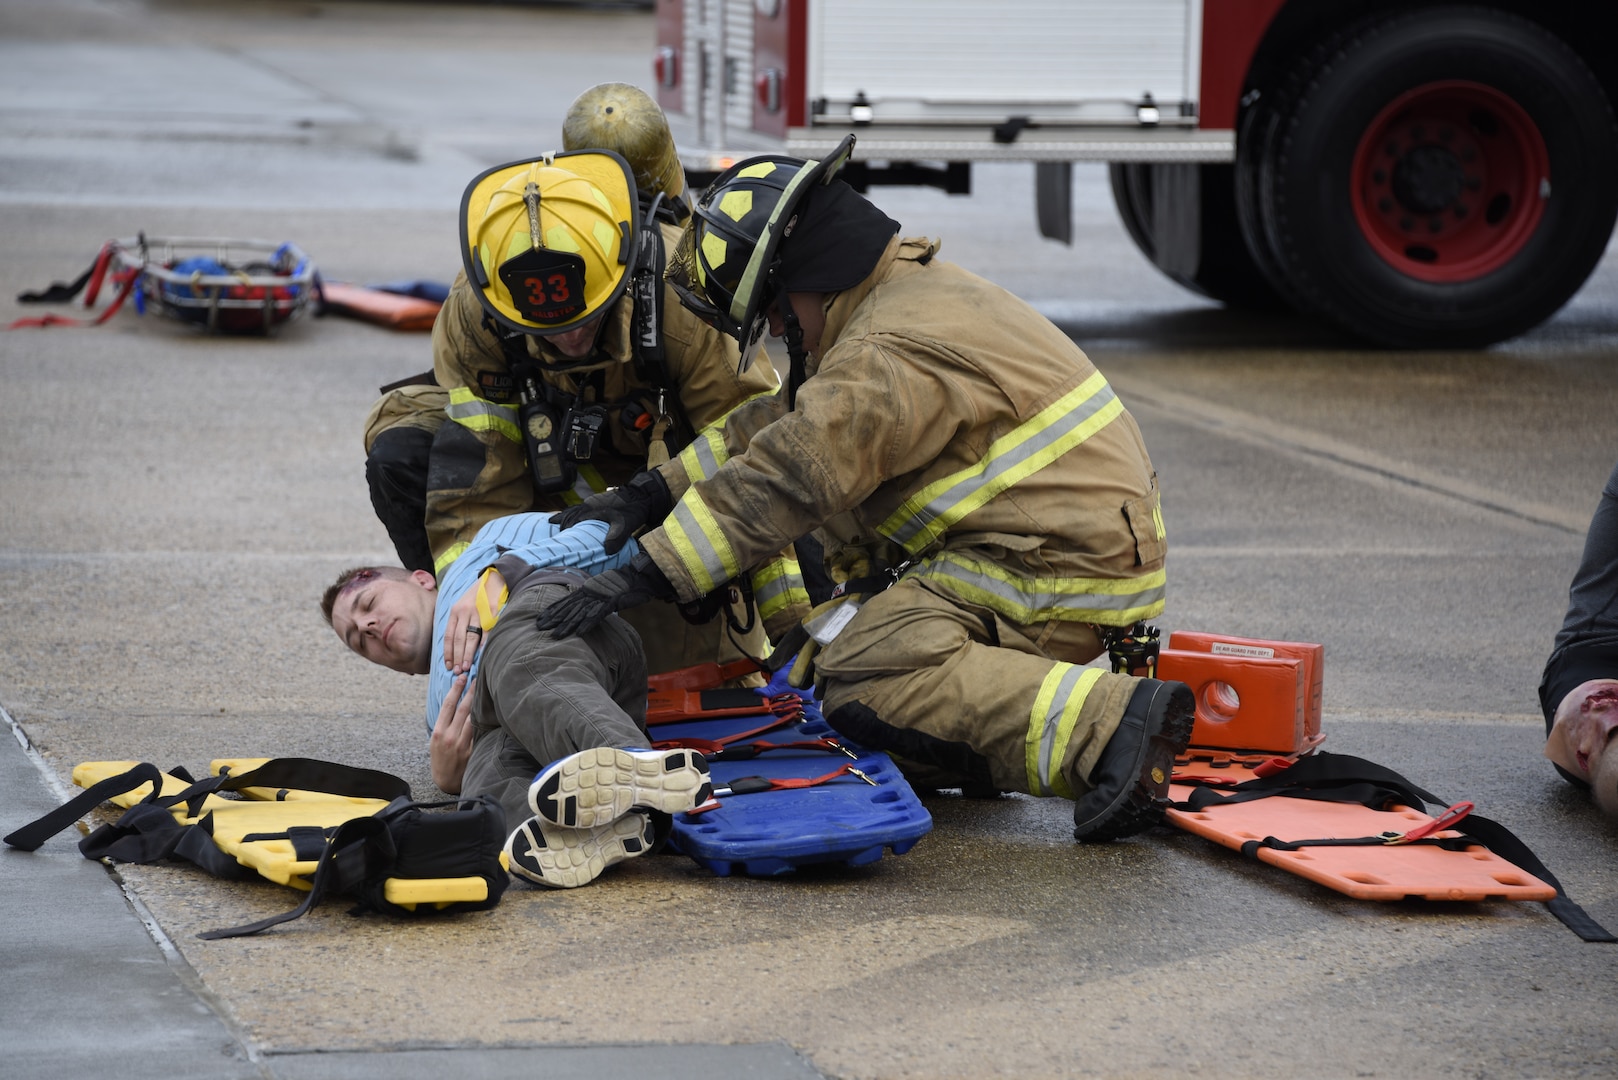 166th Civil Engineer Squadron firefighters ease a victim onto a rescue stretcher during Operation Blue Skywalker, April 10, 2019 at Delaware National Guard Base, Del. Crash victims were subsequently take to St. Francis medial Center. (U.S. Air Force photo by Mr. Mitch Topal)